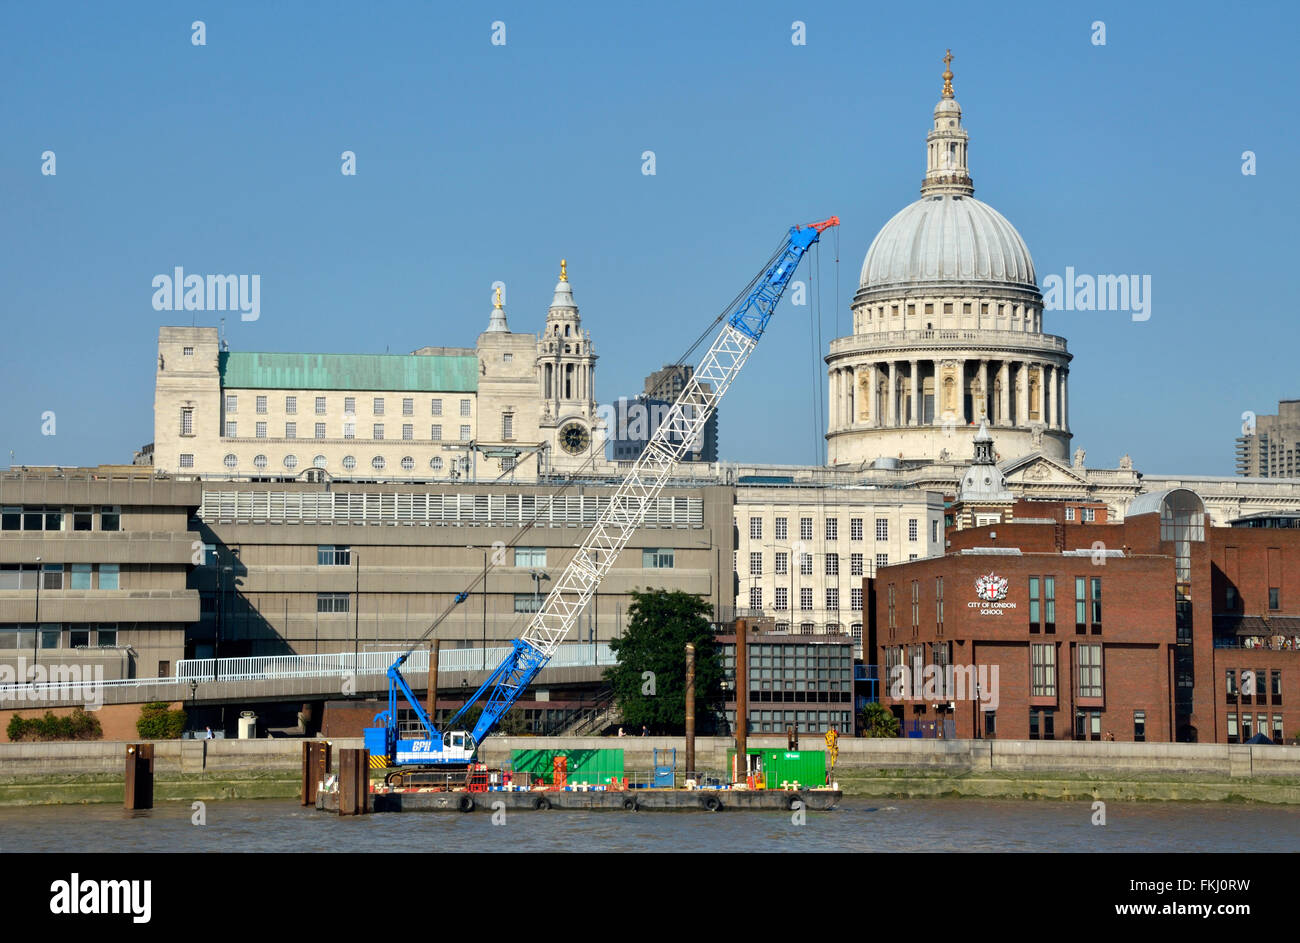 London, England, UK. BPH construction crane on the River Thames by St Paul's Cathedral Stock Photo